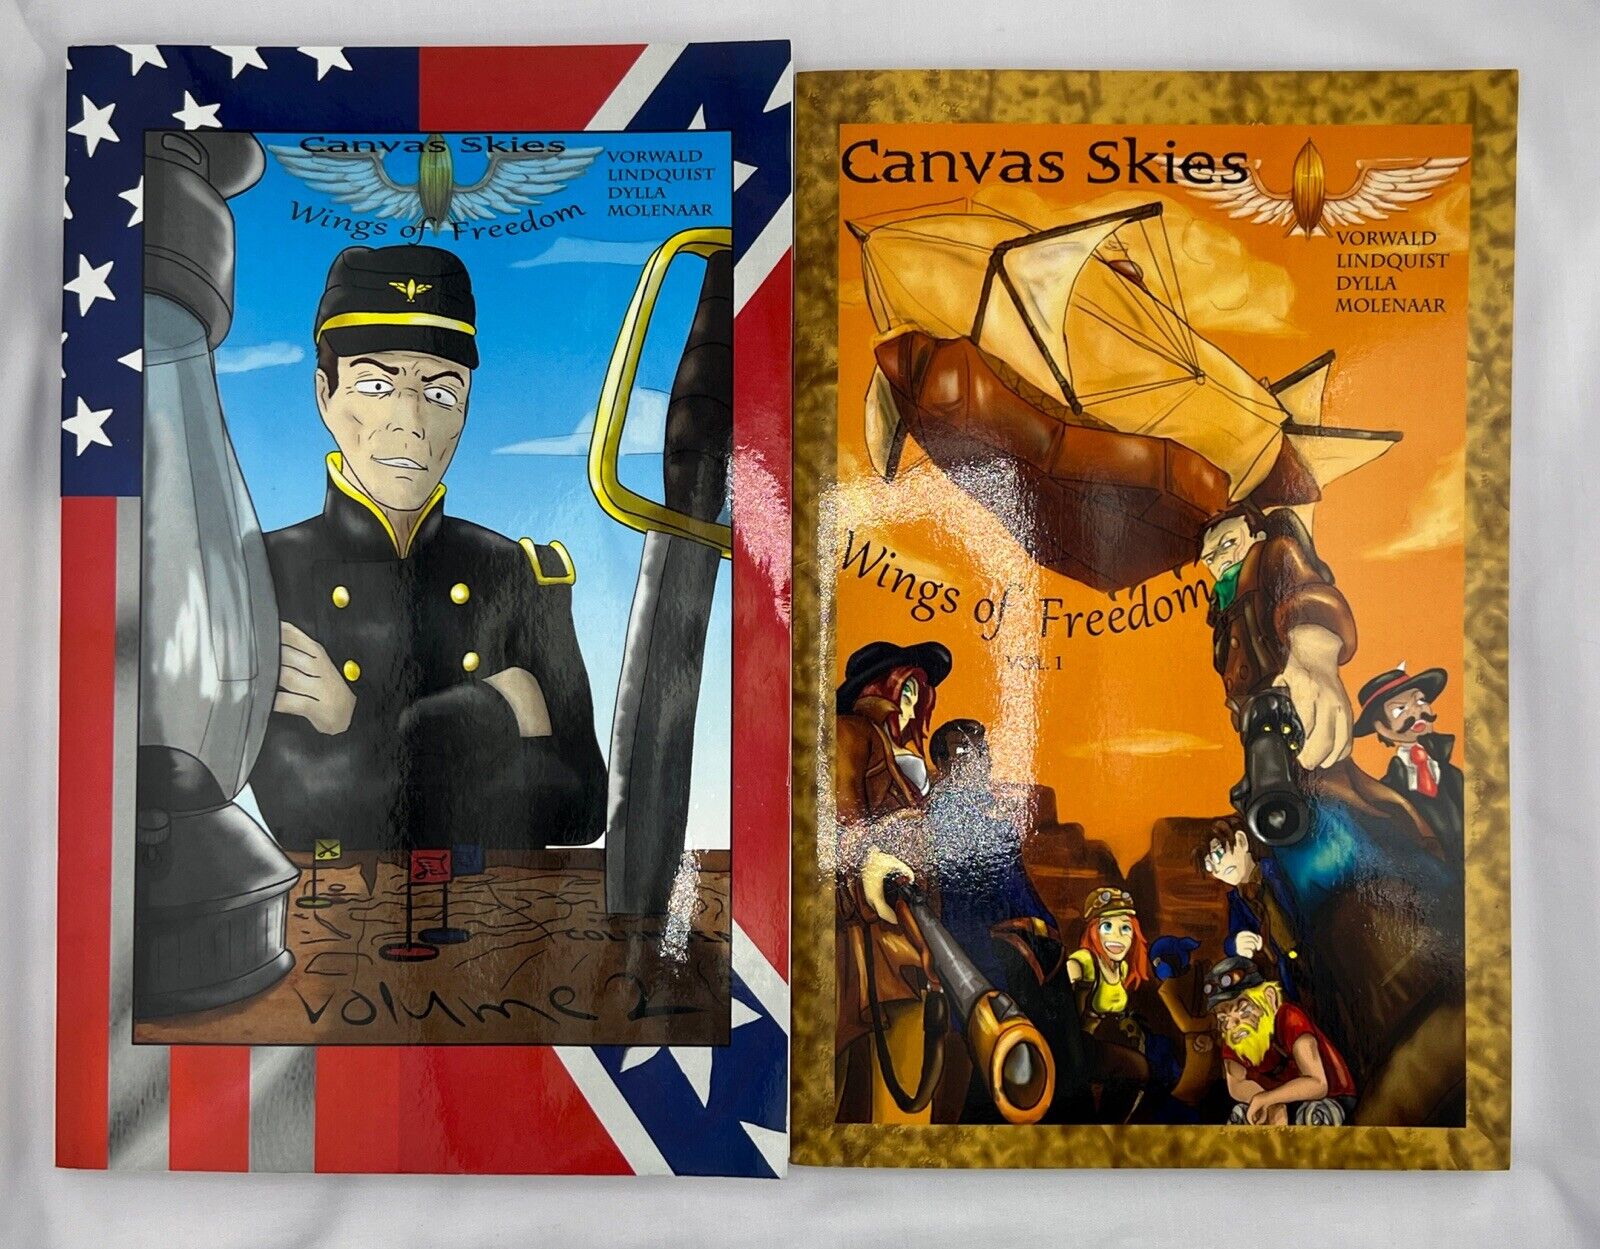 Canvas Skies : Wings of Freedom Volume 1 and Volume 2